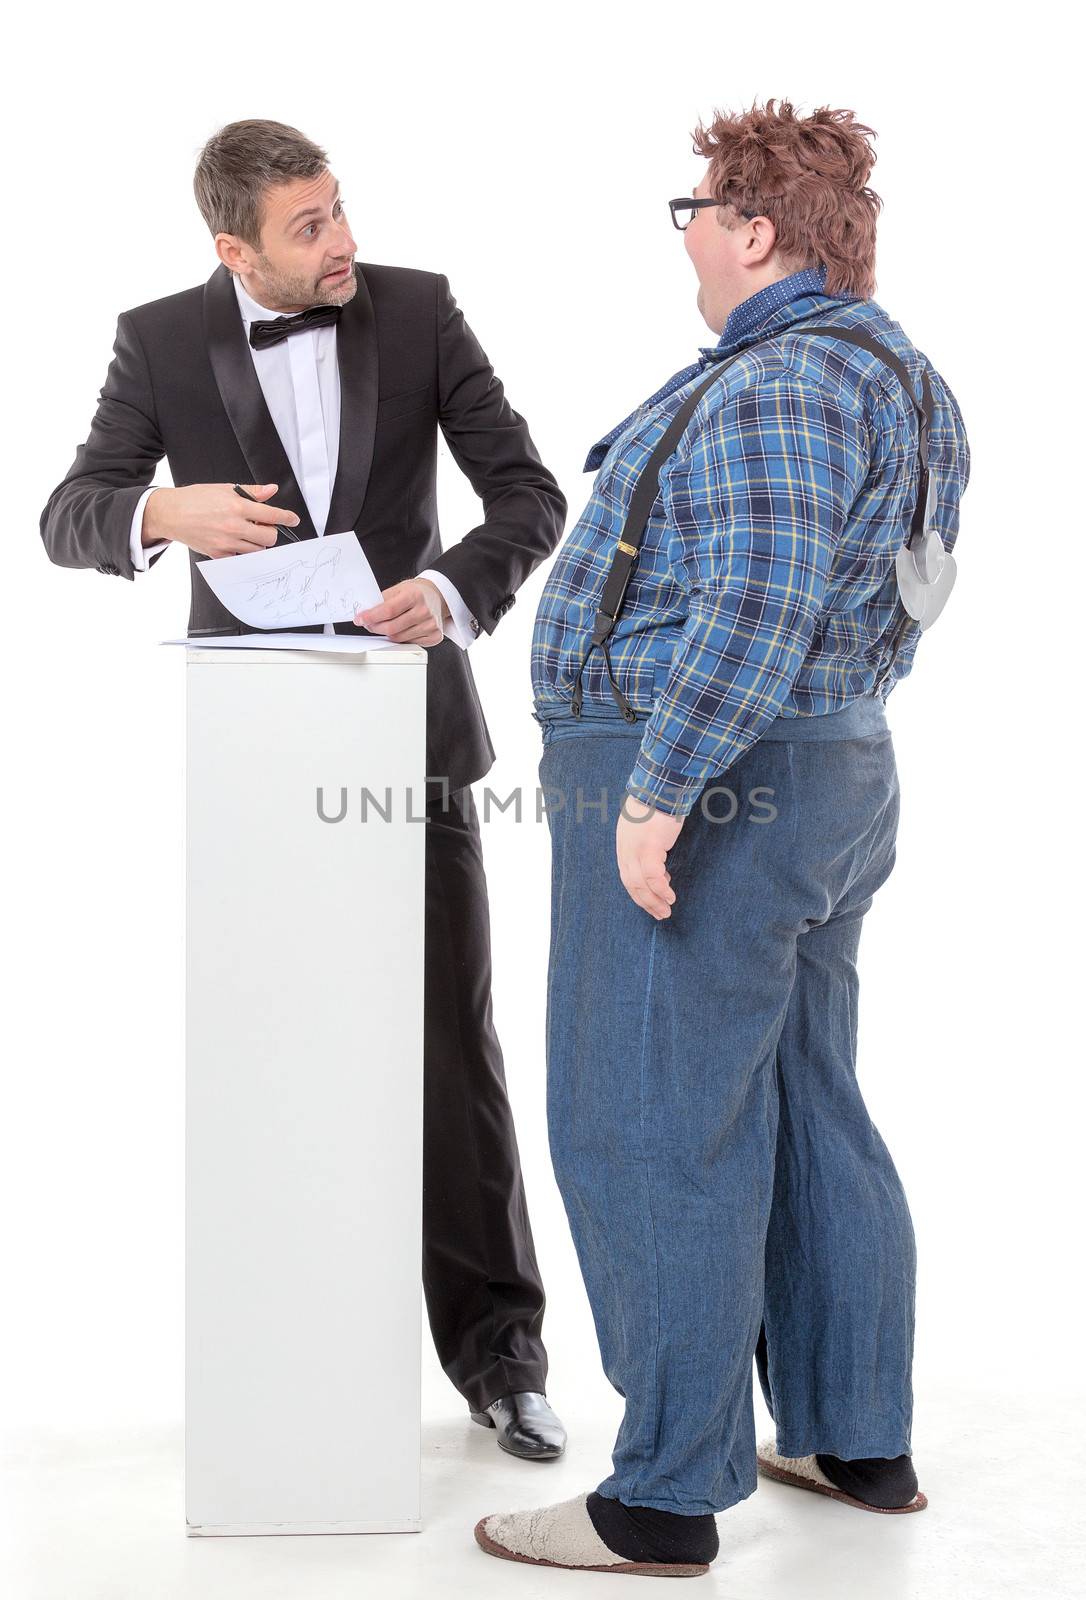 Elegant man arguing with a country yokel by Discovod